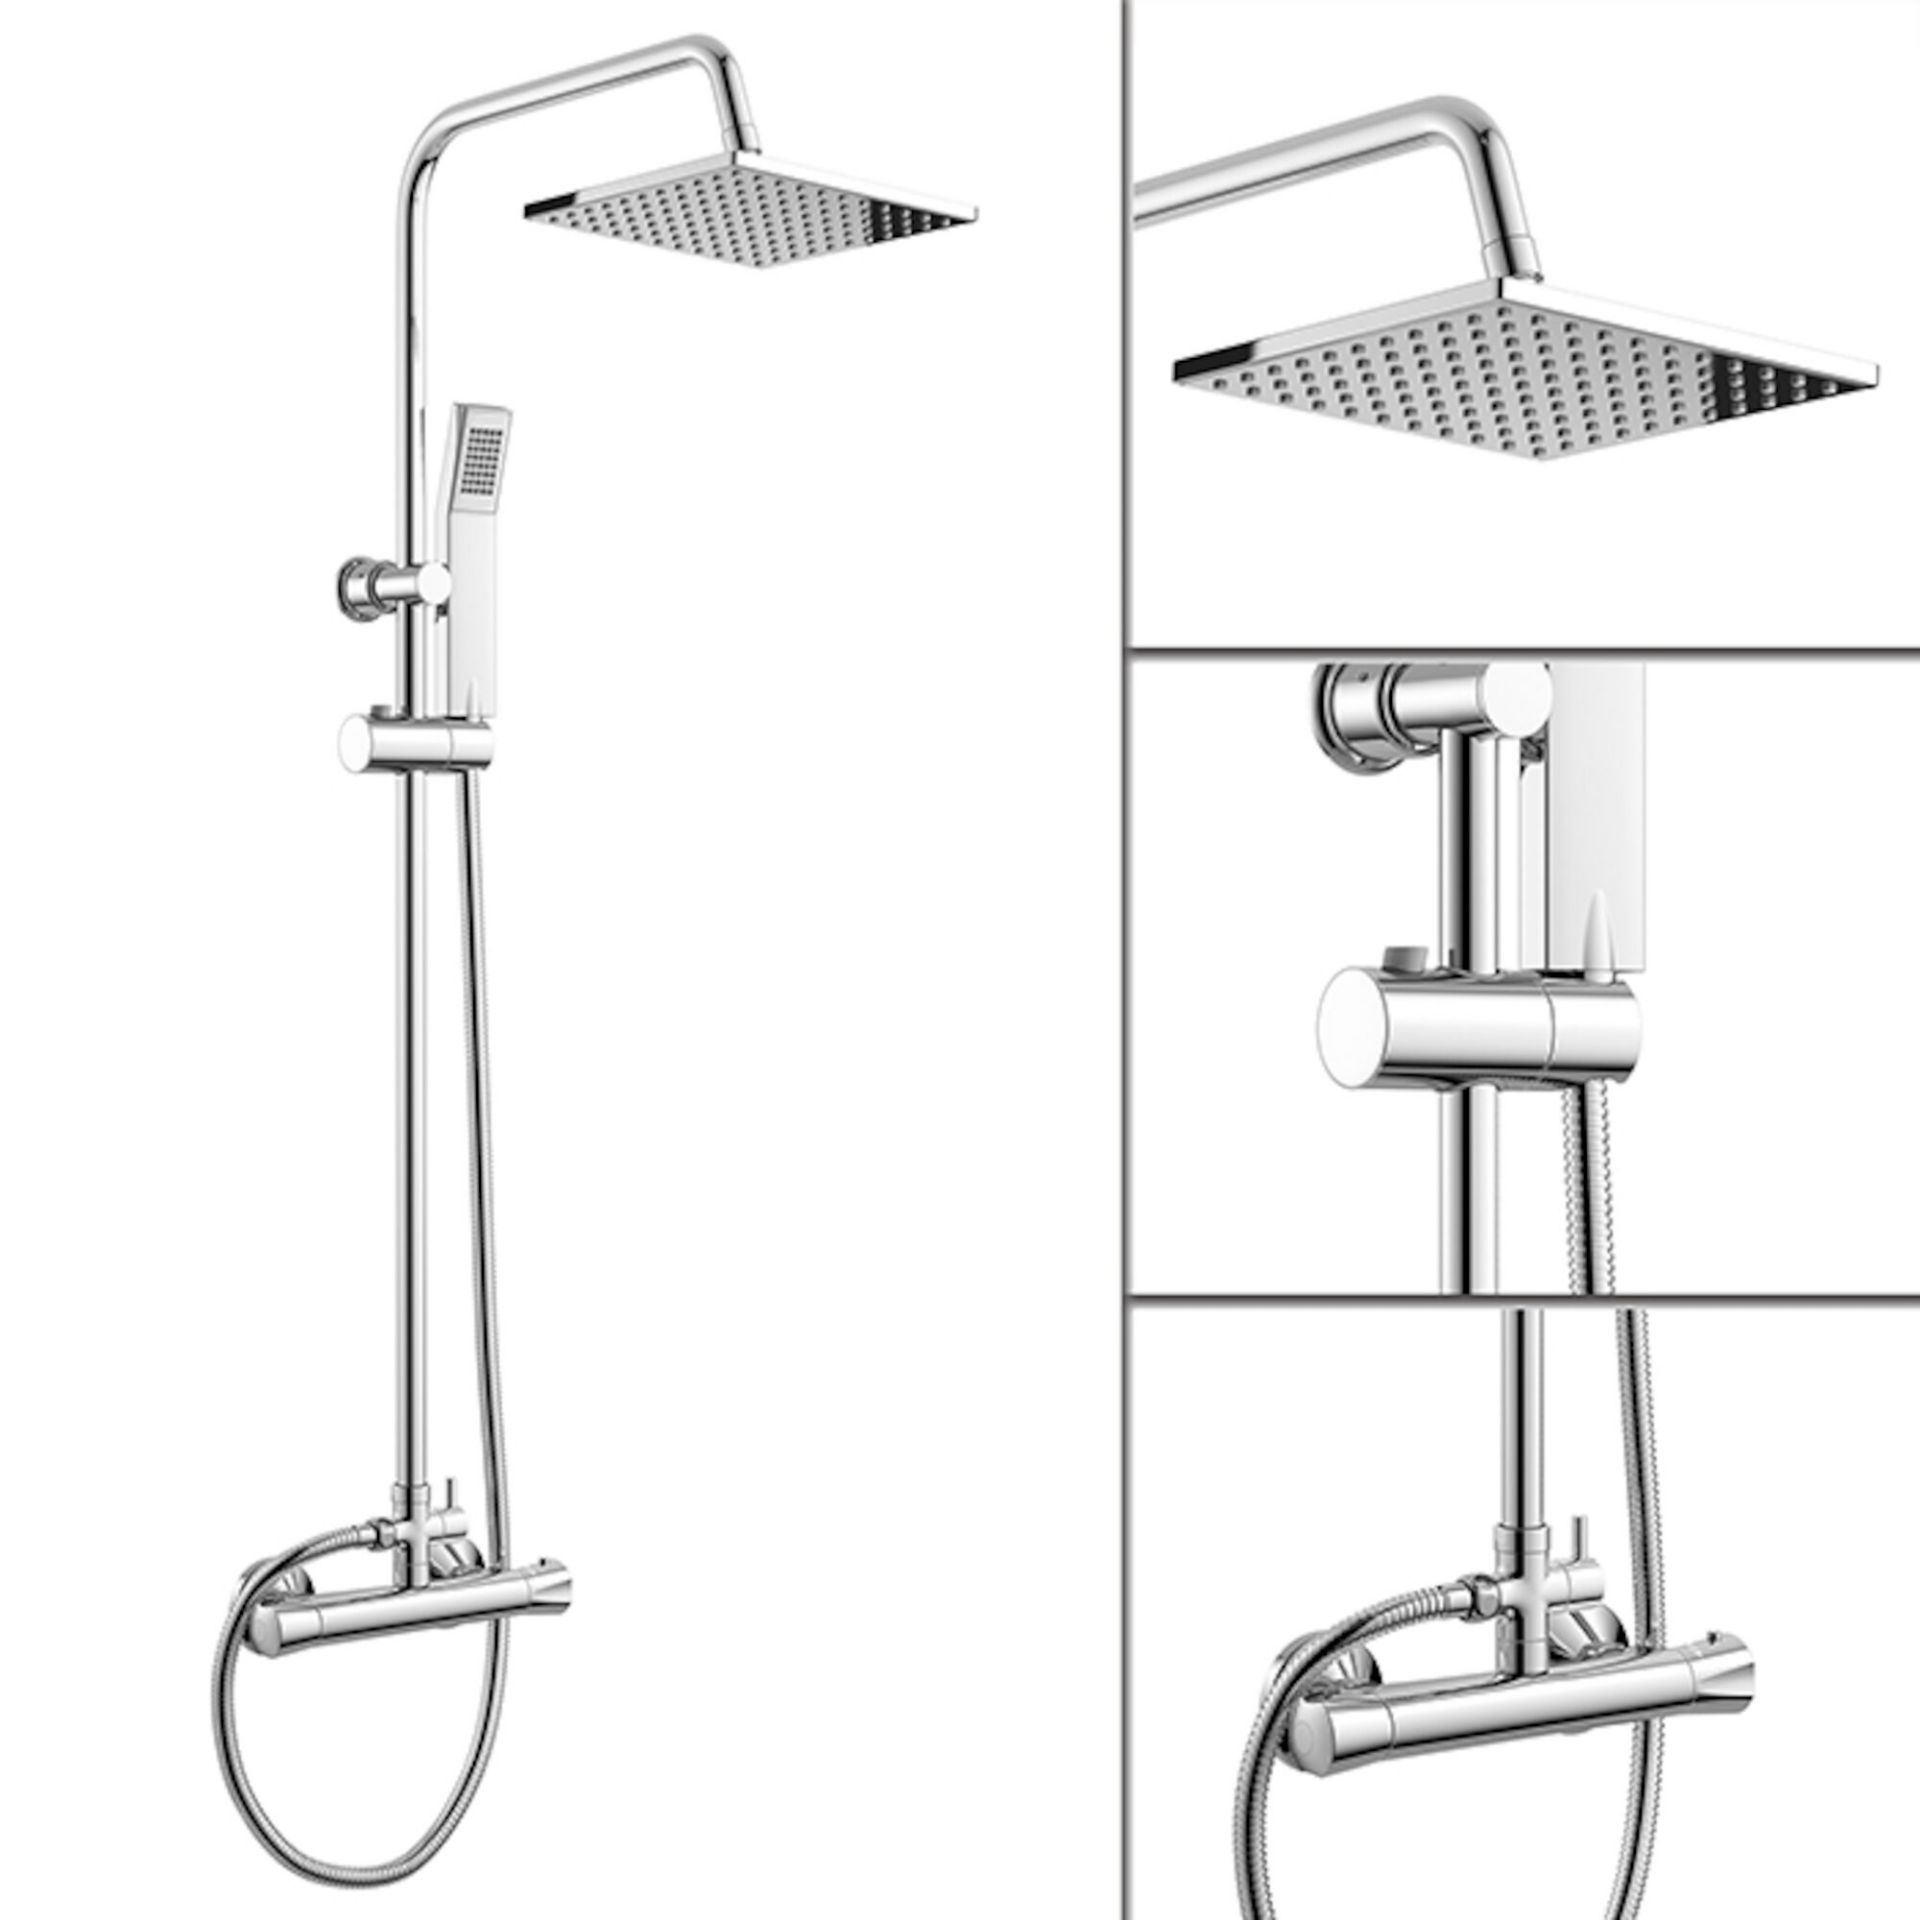 (LU125) Square Exposed Thermostatic Shower Kit & Head. Curved features and contemporary rounded - Bild 2 aus 2